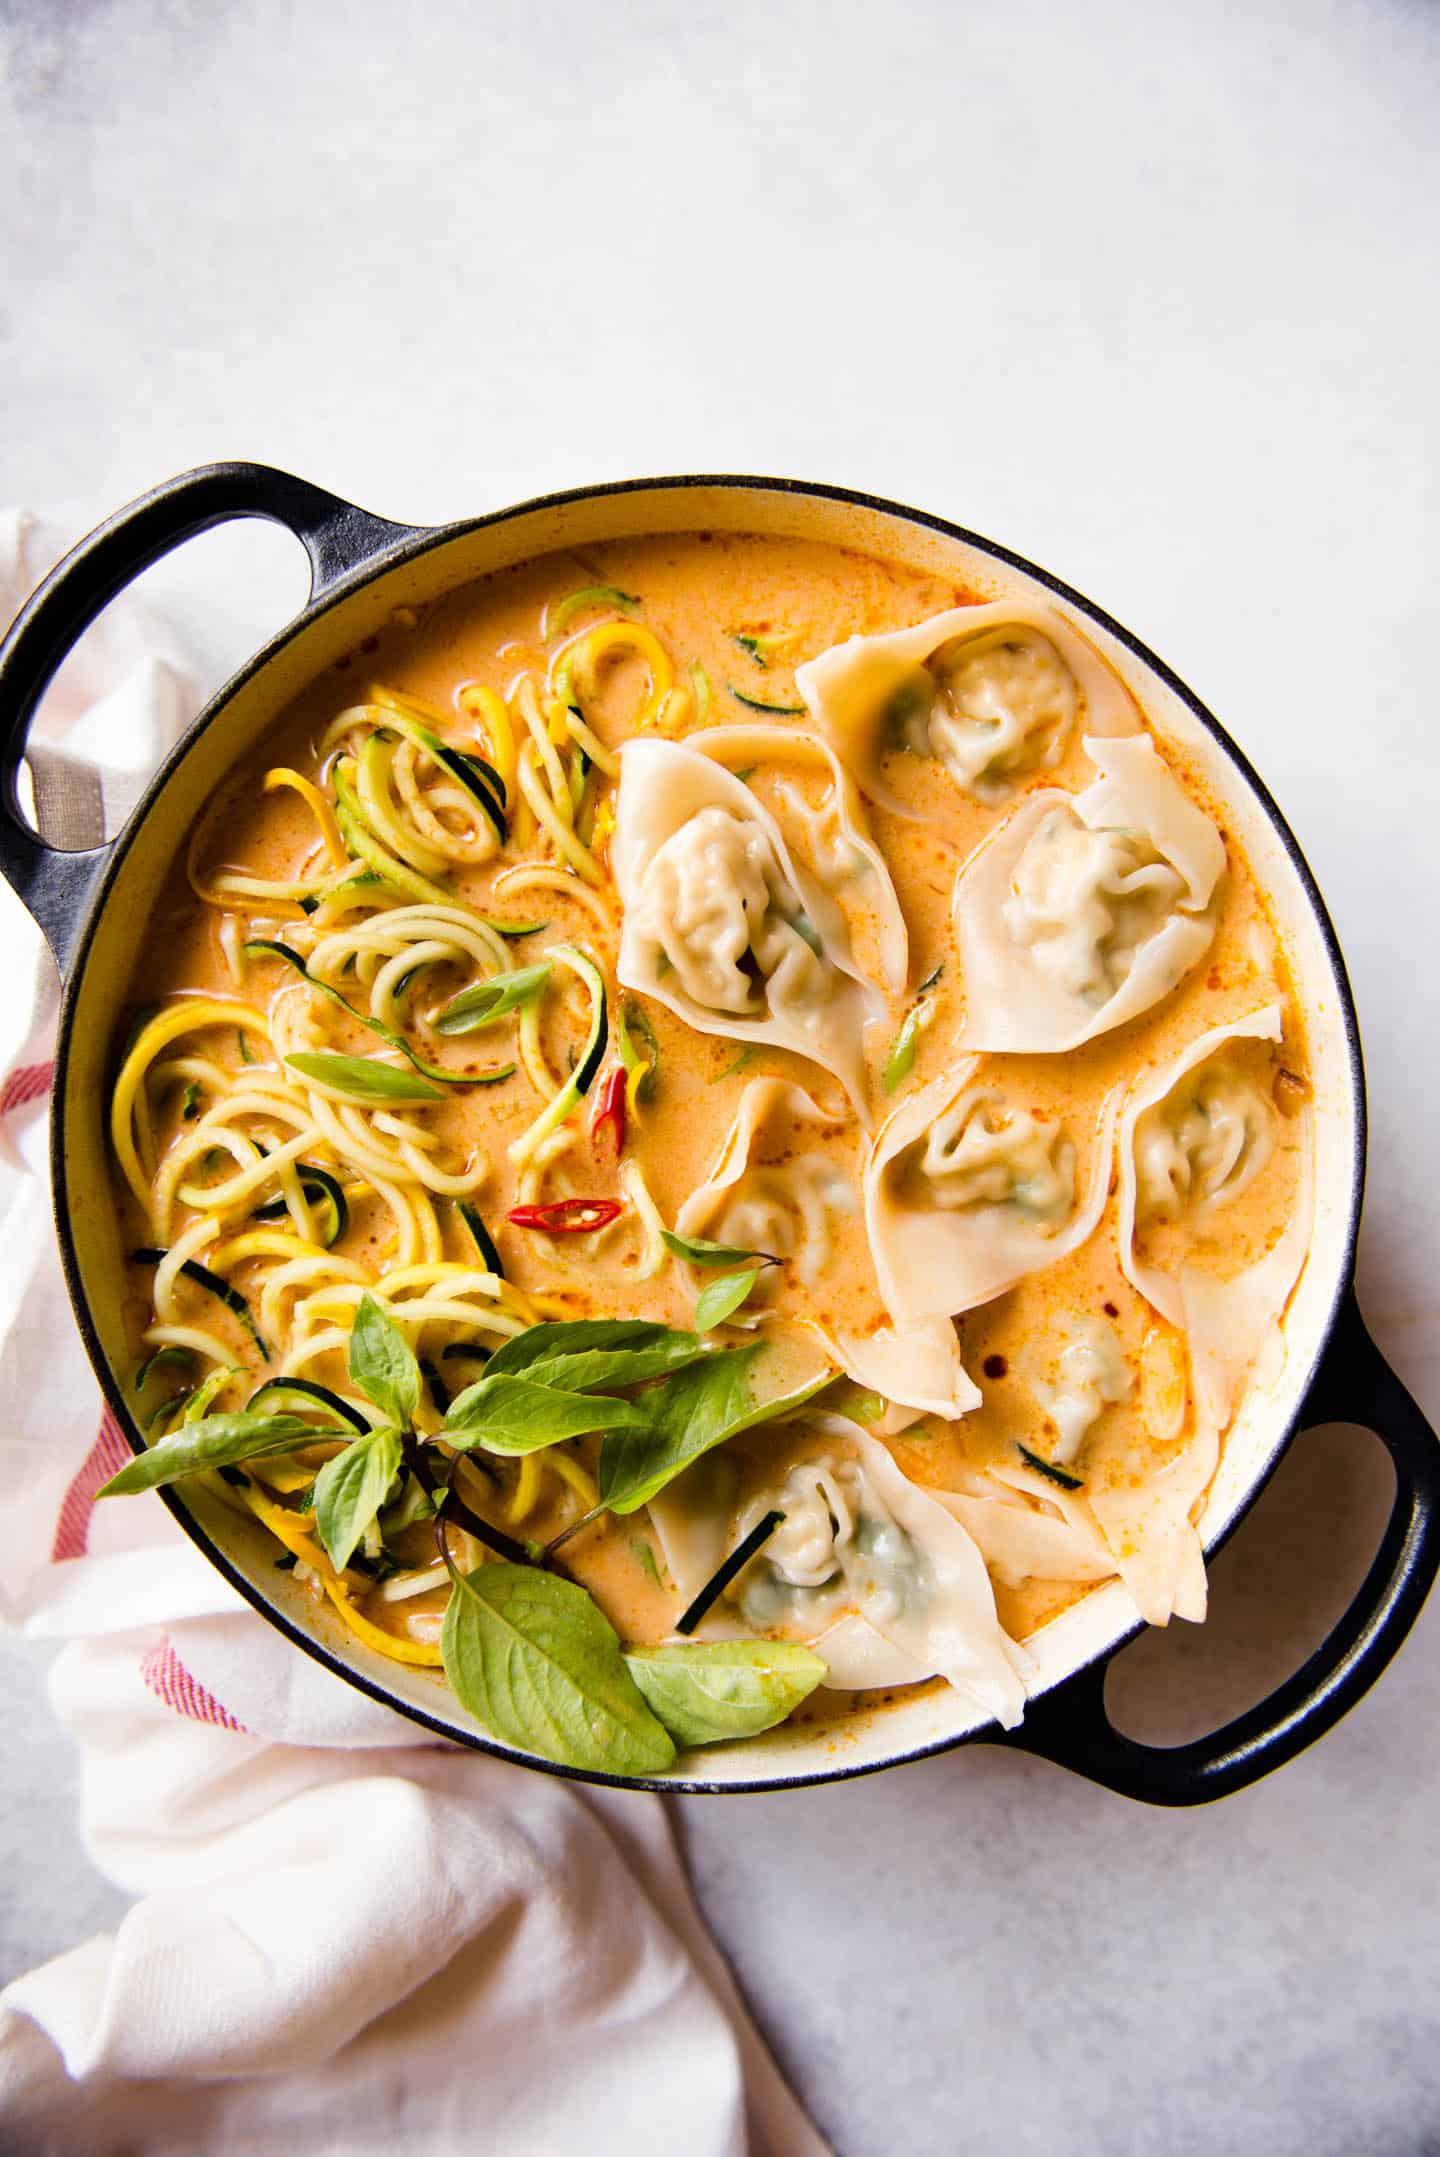 Red Curry Wonton Soup with Zucchini Noodles (Vegetarian)